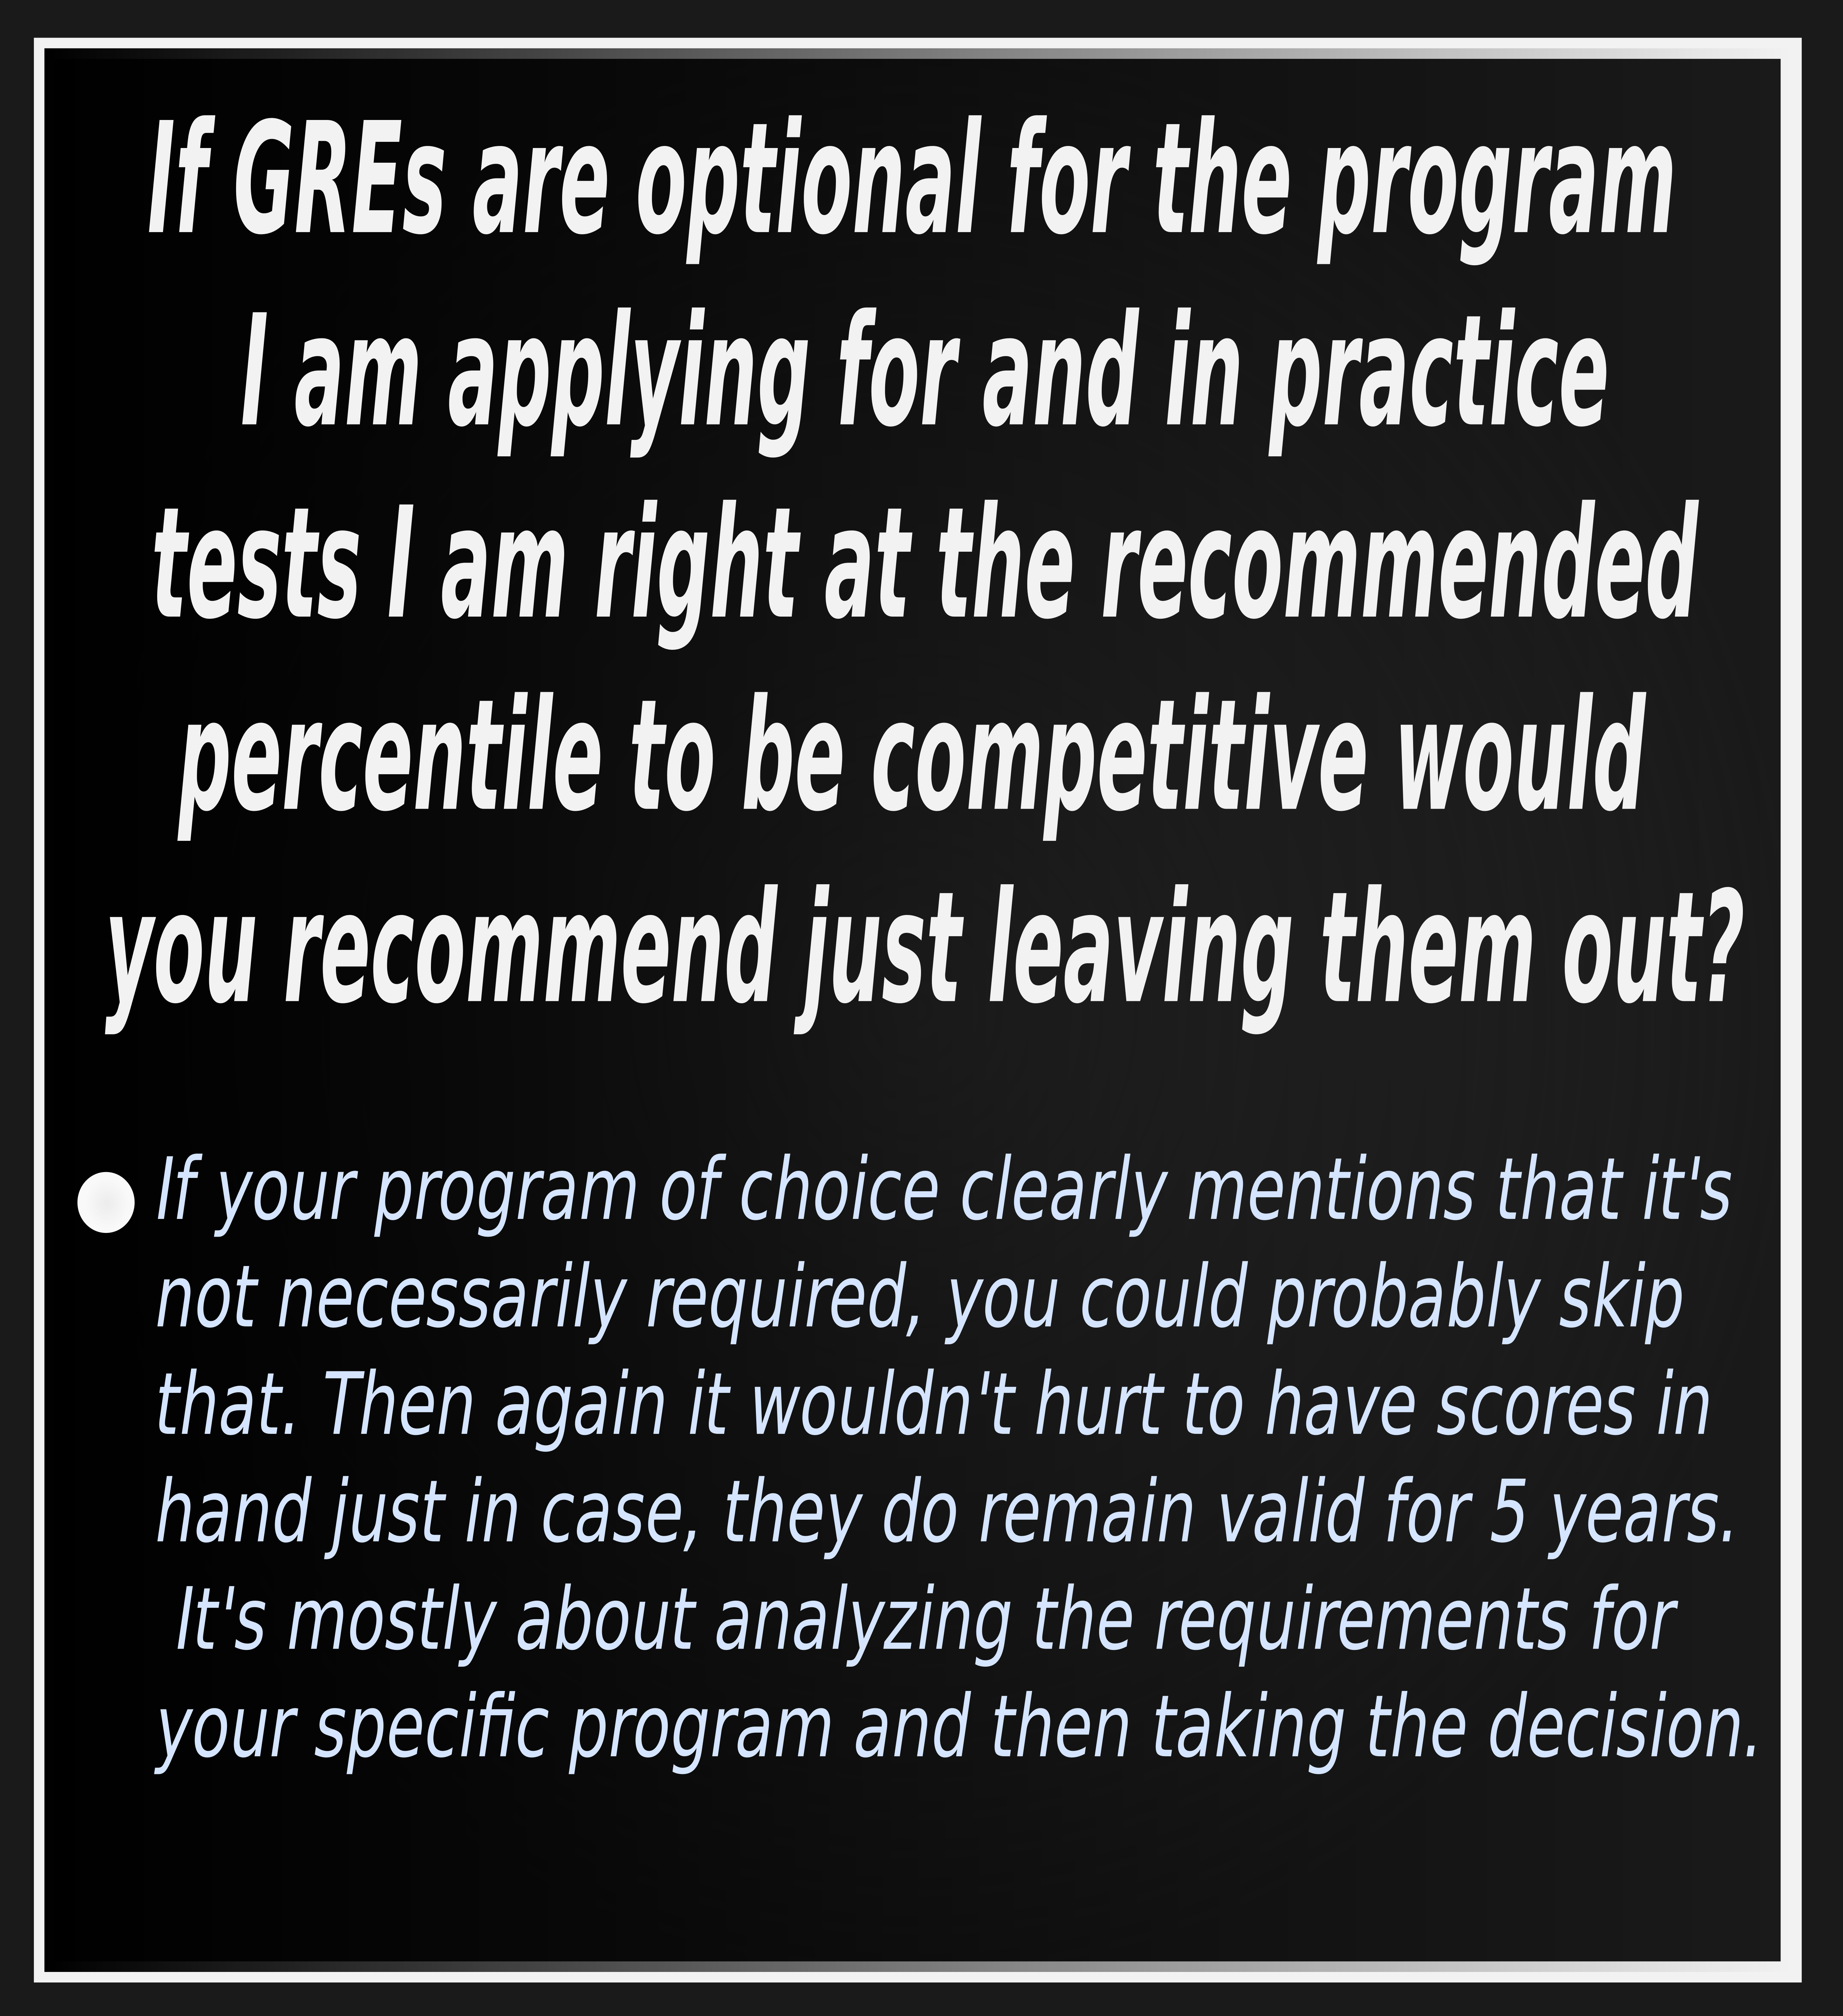 If GREs are optional for the program I am applying for and in practice tests I am right at the recommended percentile to be competitive, would you recommend just leaving them out?